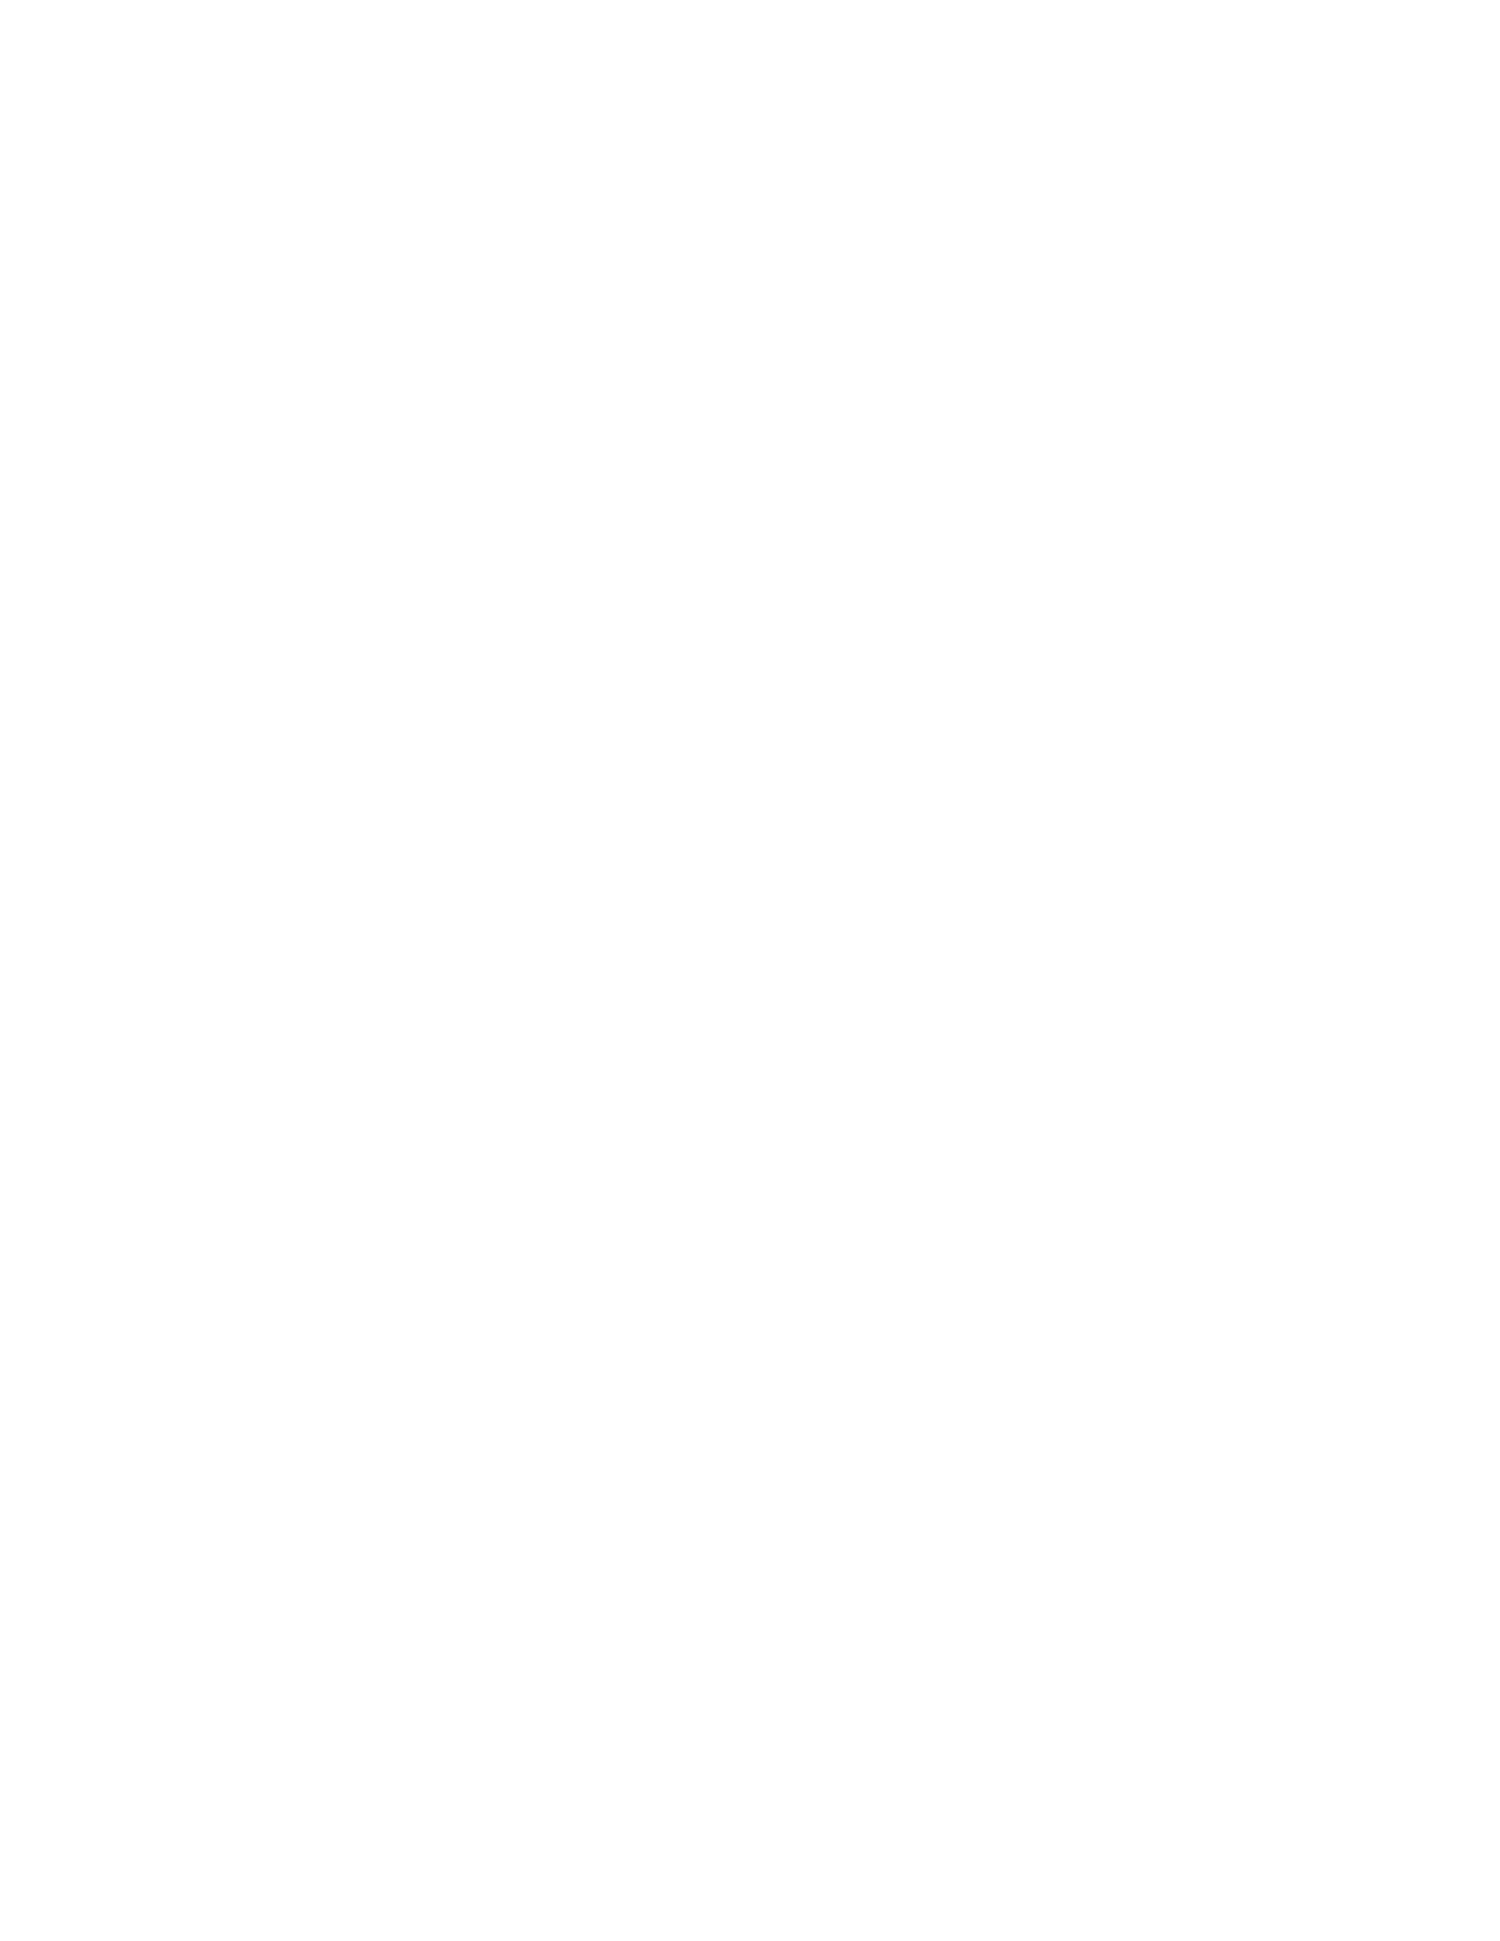 Dry Utility Experts